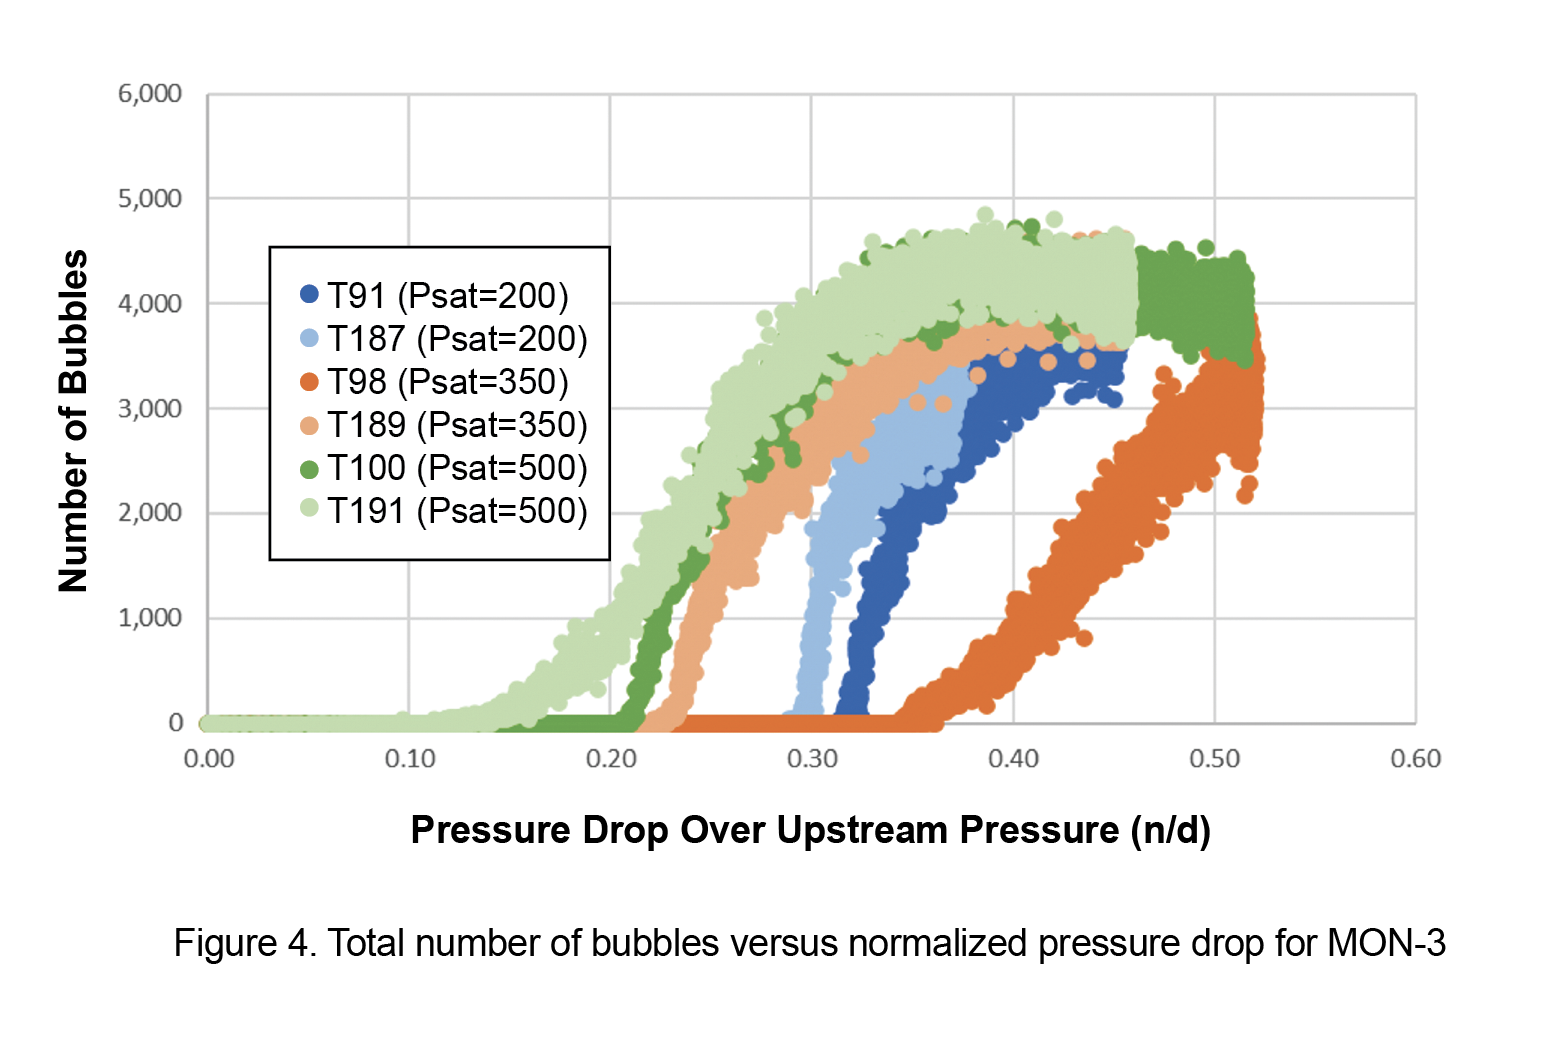 Figure 4. Total number of bubbles versus normalized pressure drop for MON-3